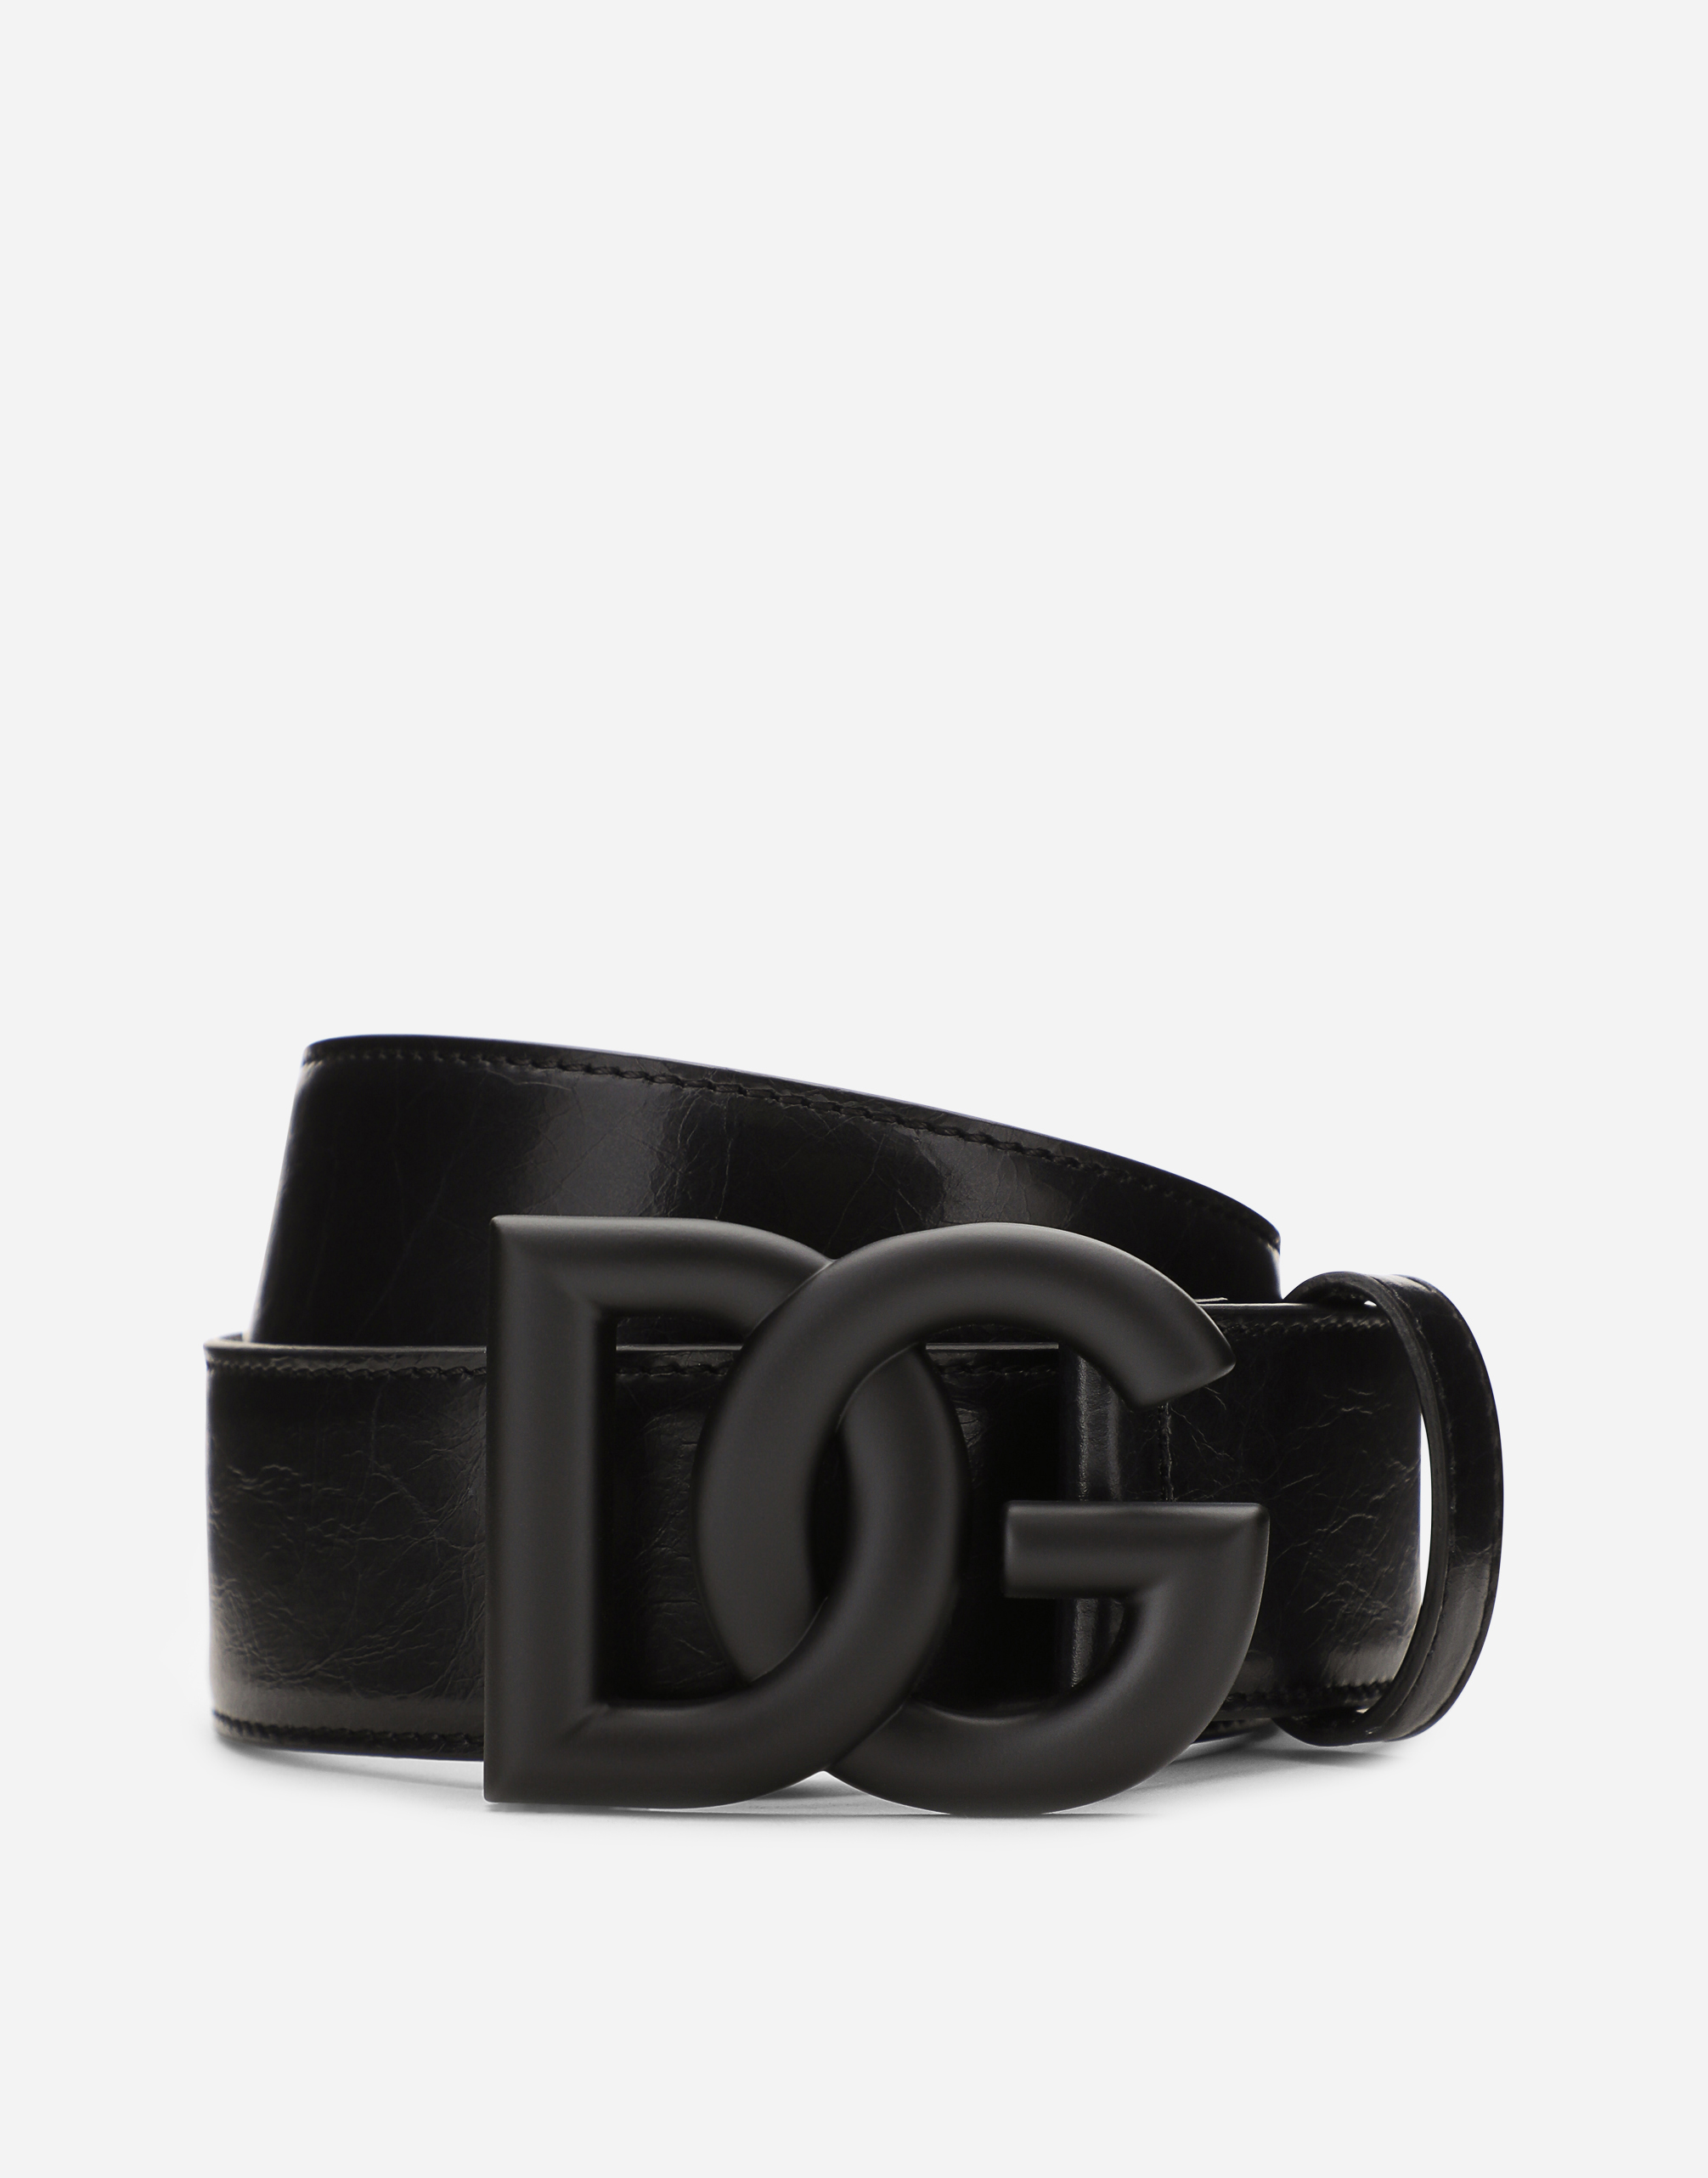 Matte nappa leather belt with crossover DG logo buckle in Multicolor